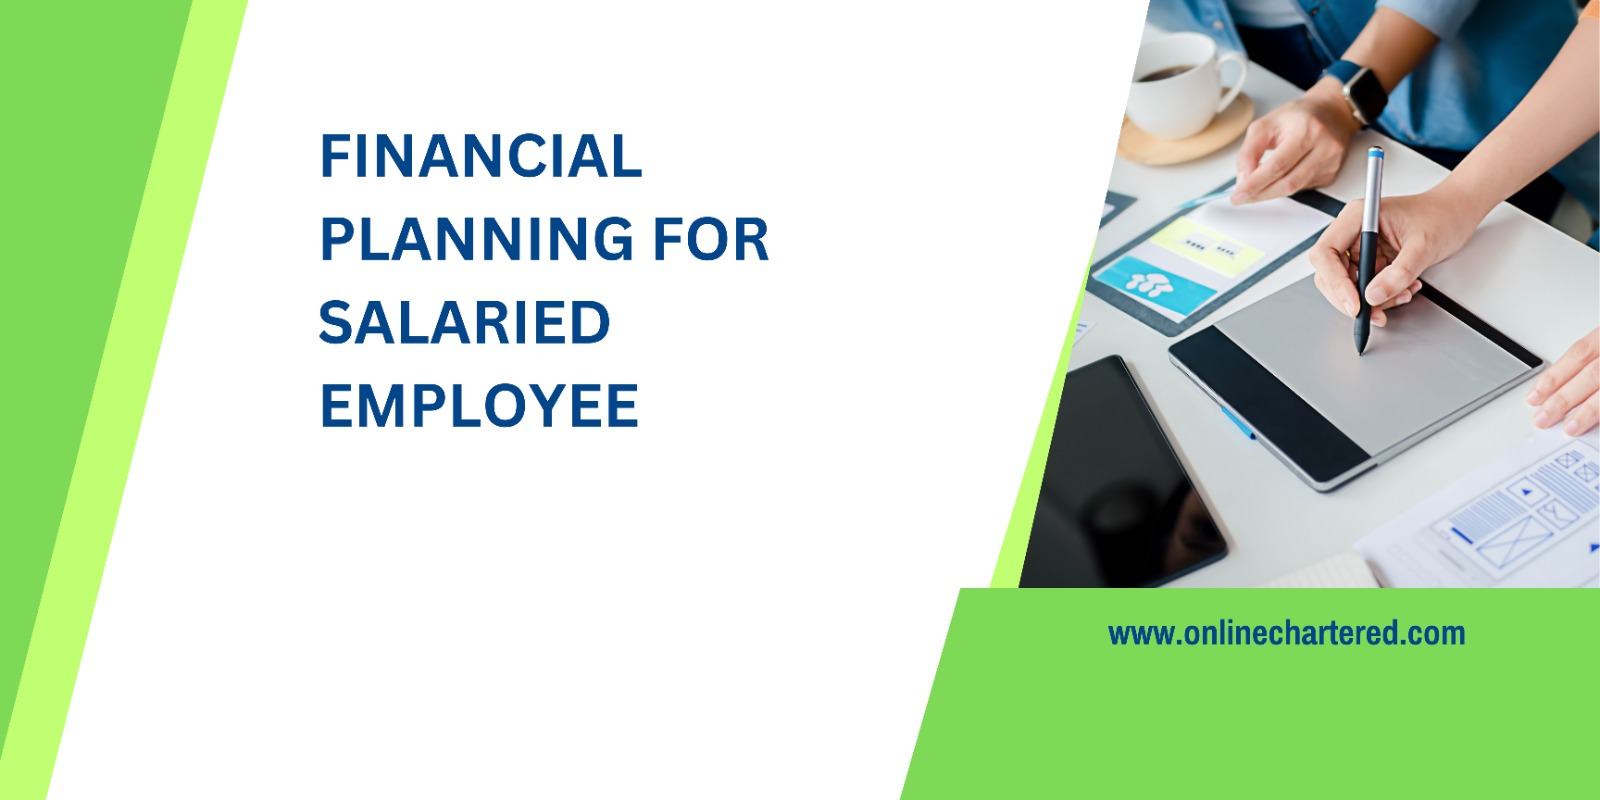 Financial planning for salaried employees